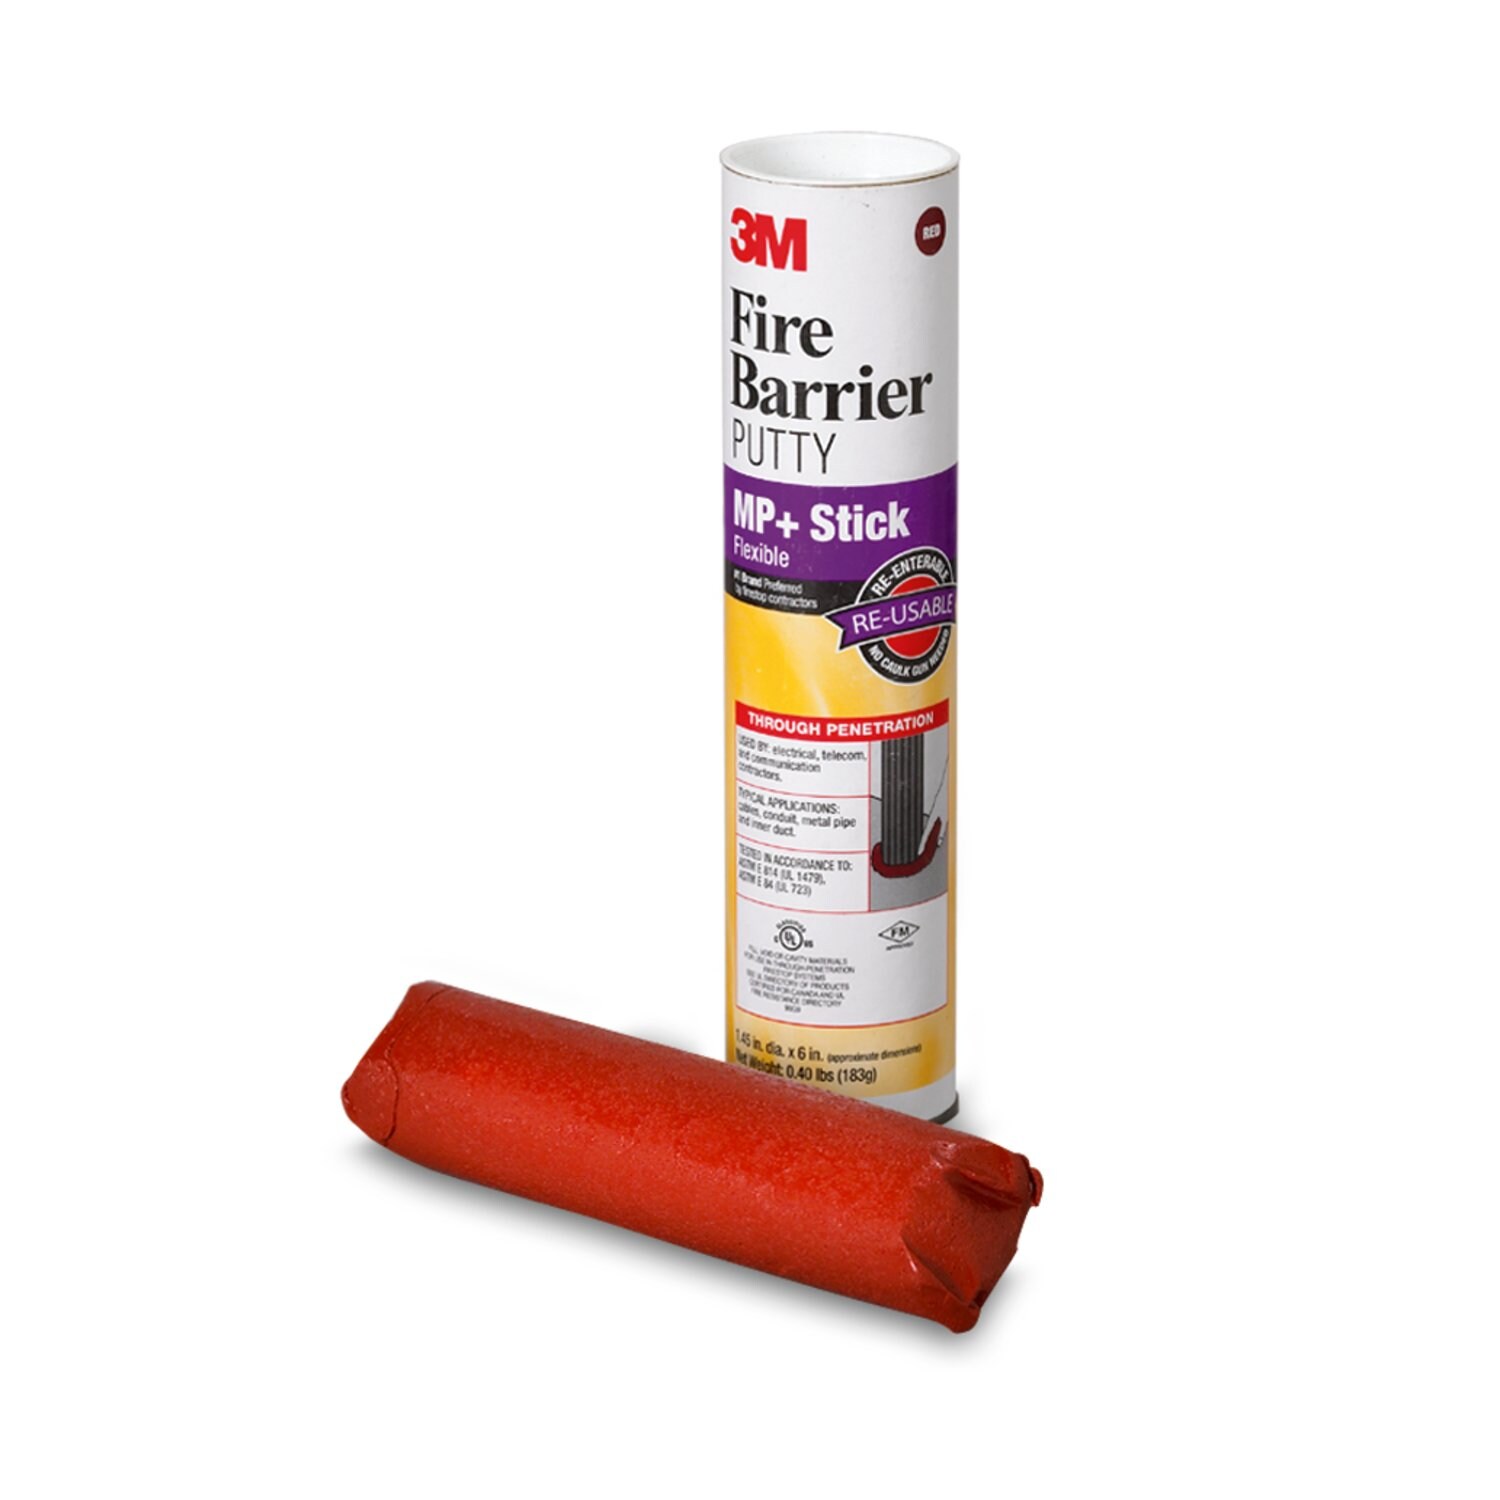 7000059397 - 3M Fire Barrier Moldable Putty Stix MP+, Red, 1.45 in x 6 in, 12/case